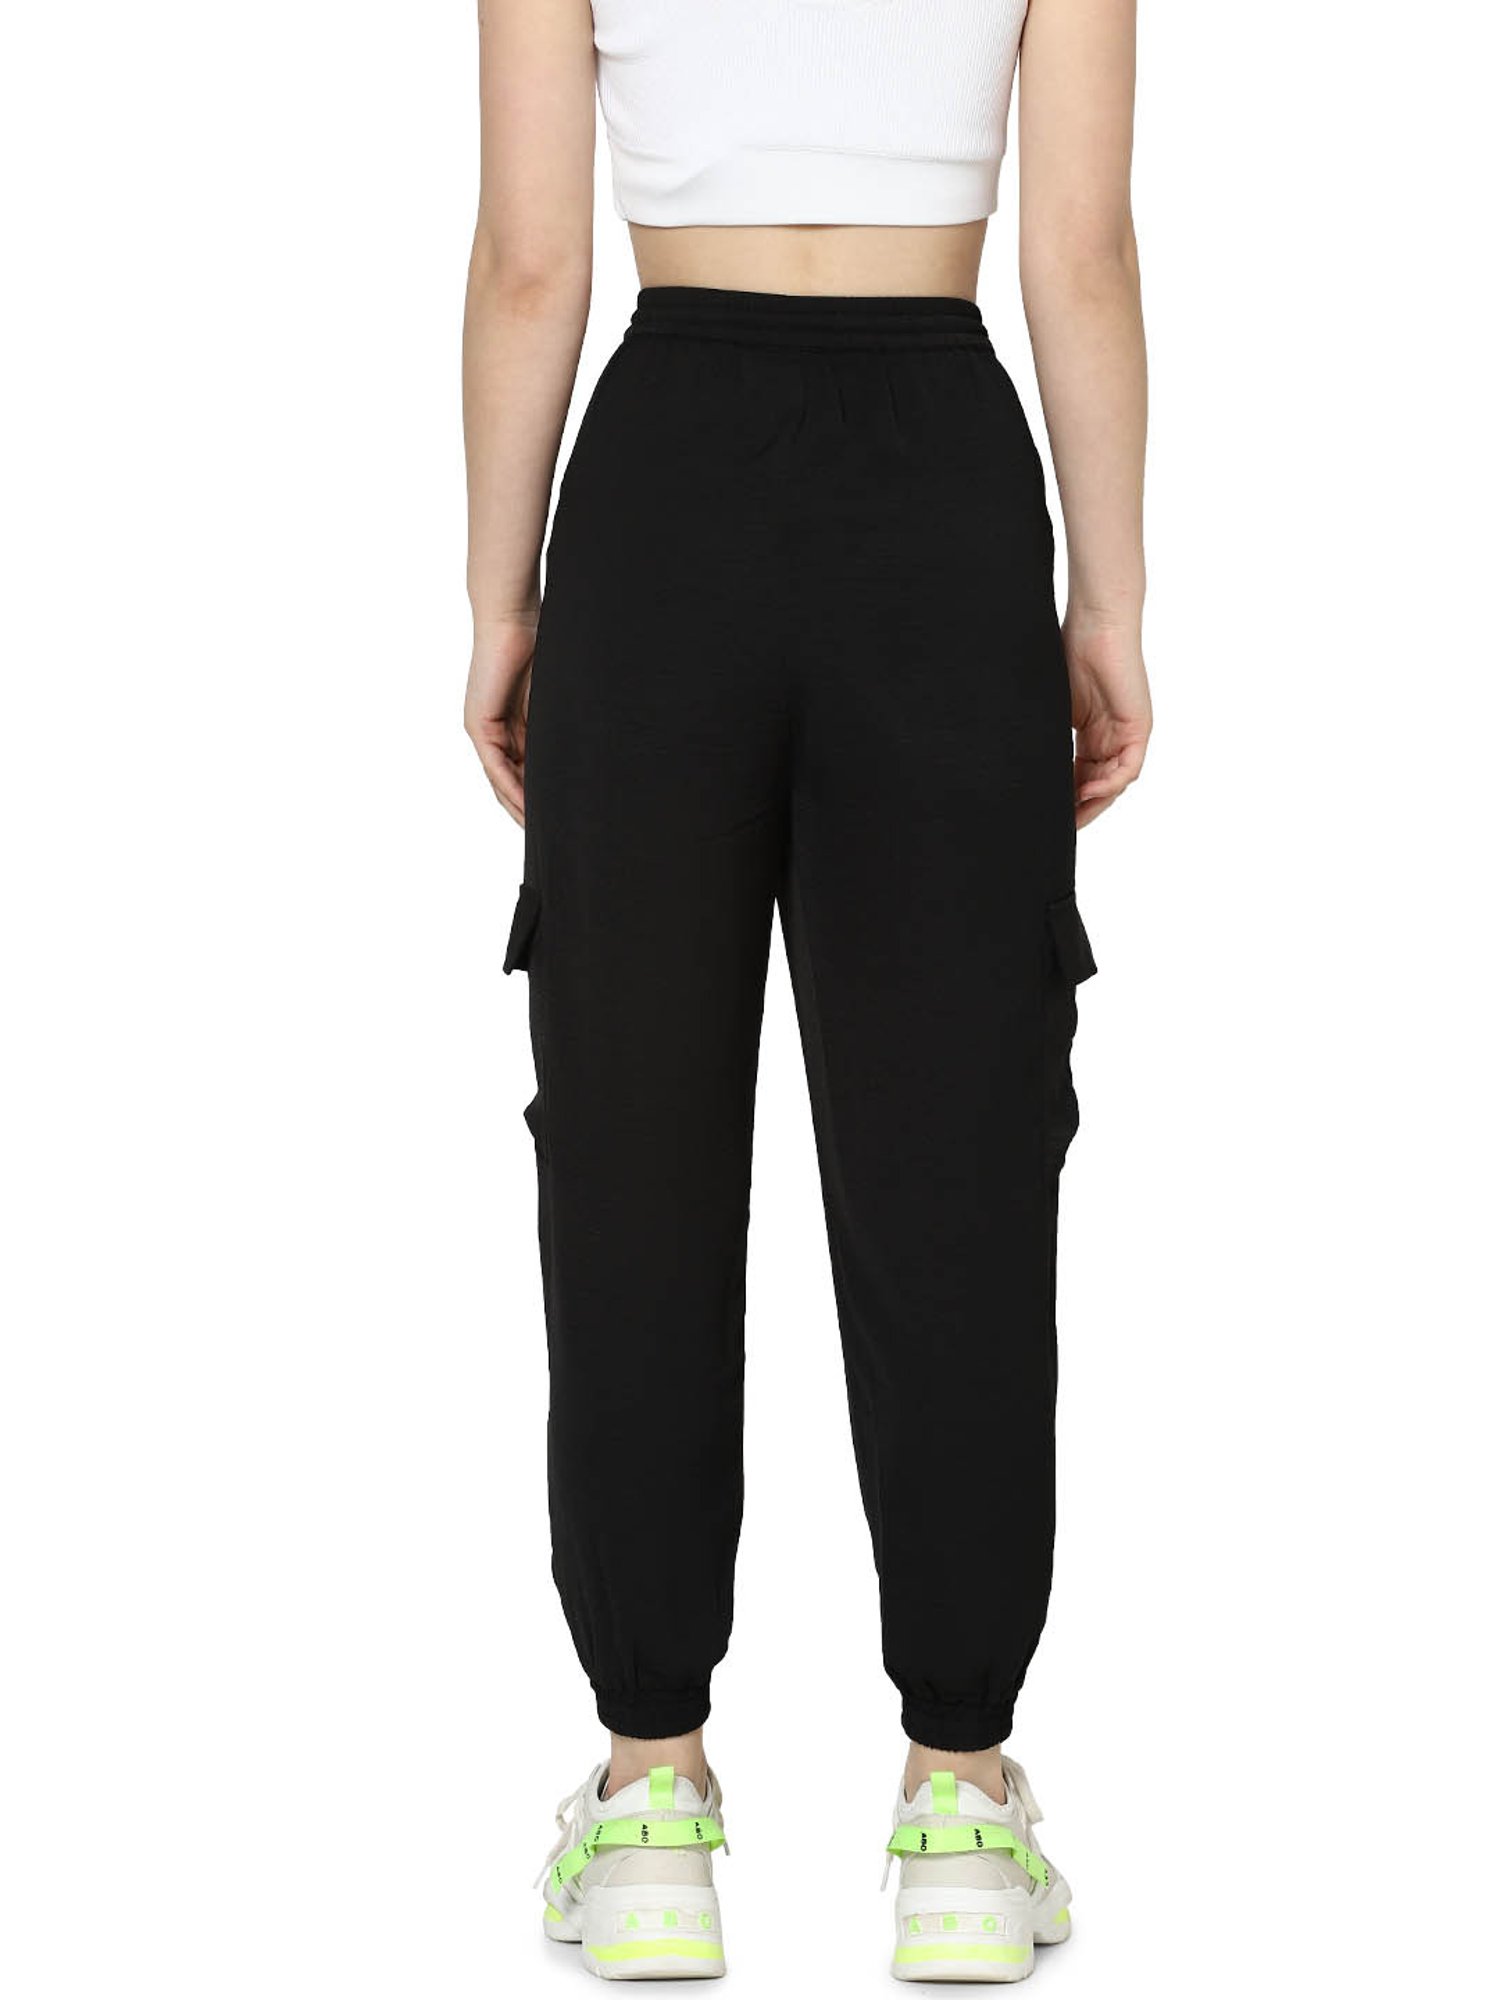 Buy Cation Orange Color-Block Mid rise Fitted Track Pants for Women Online  @ Tata CLiQ